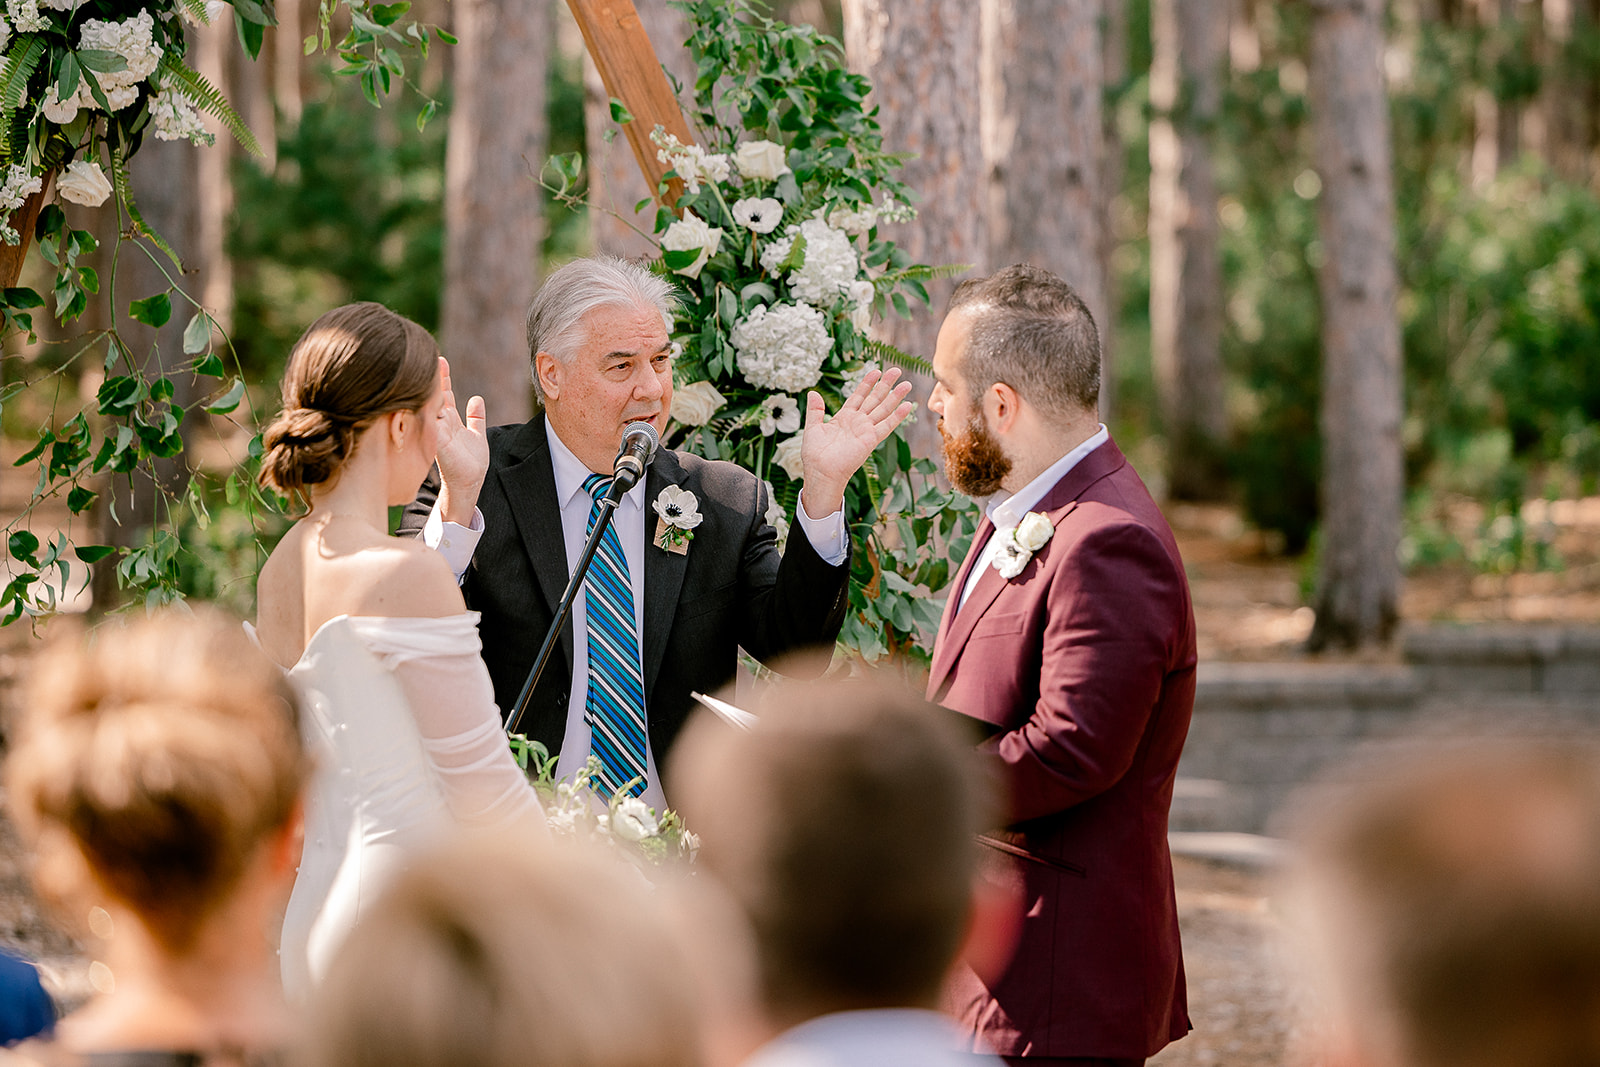 wedding couple at the alter as their officiant raises his hands to speak to them